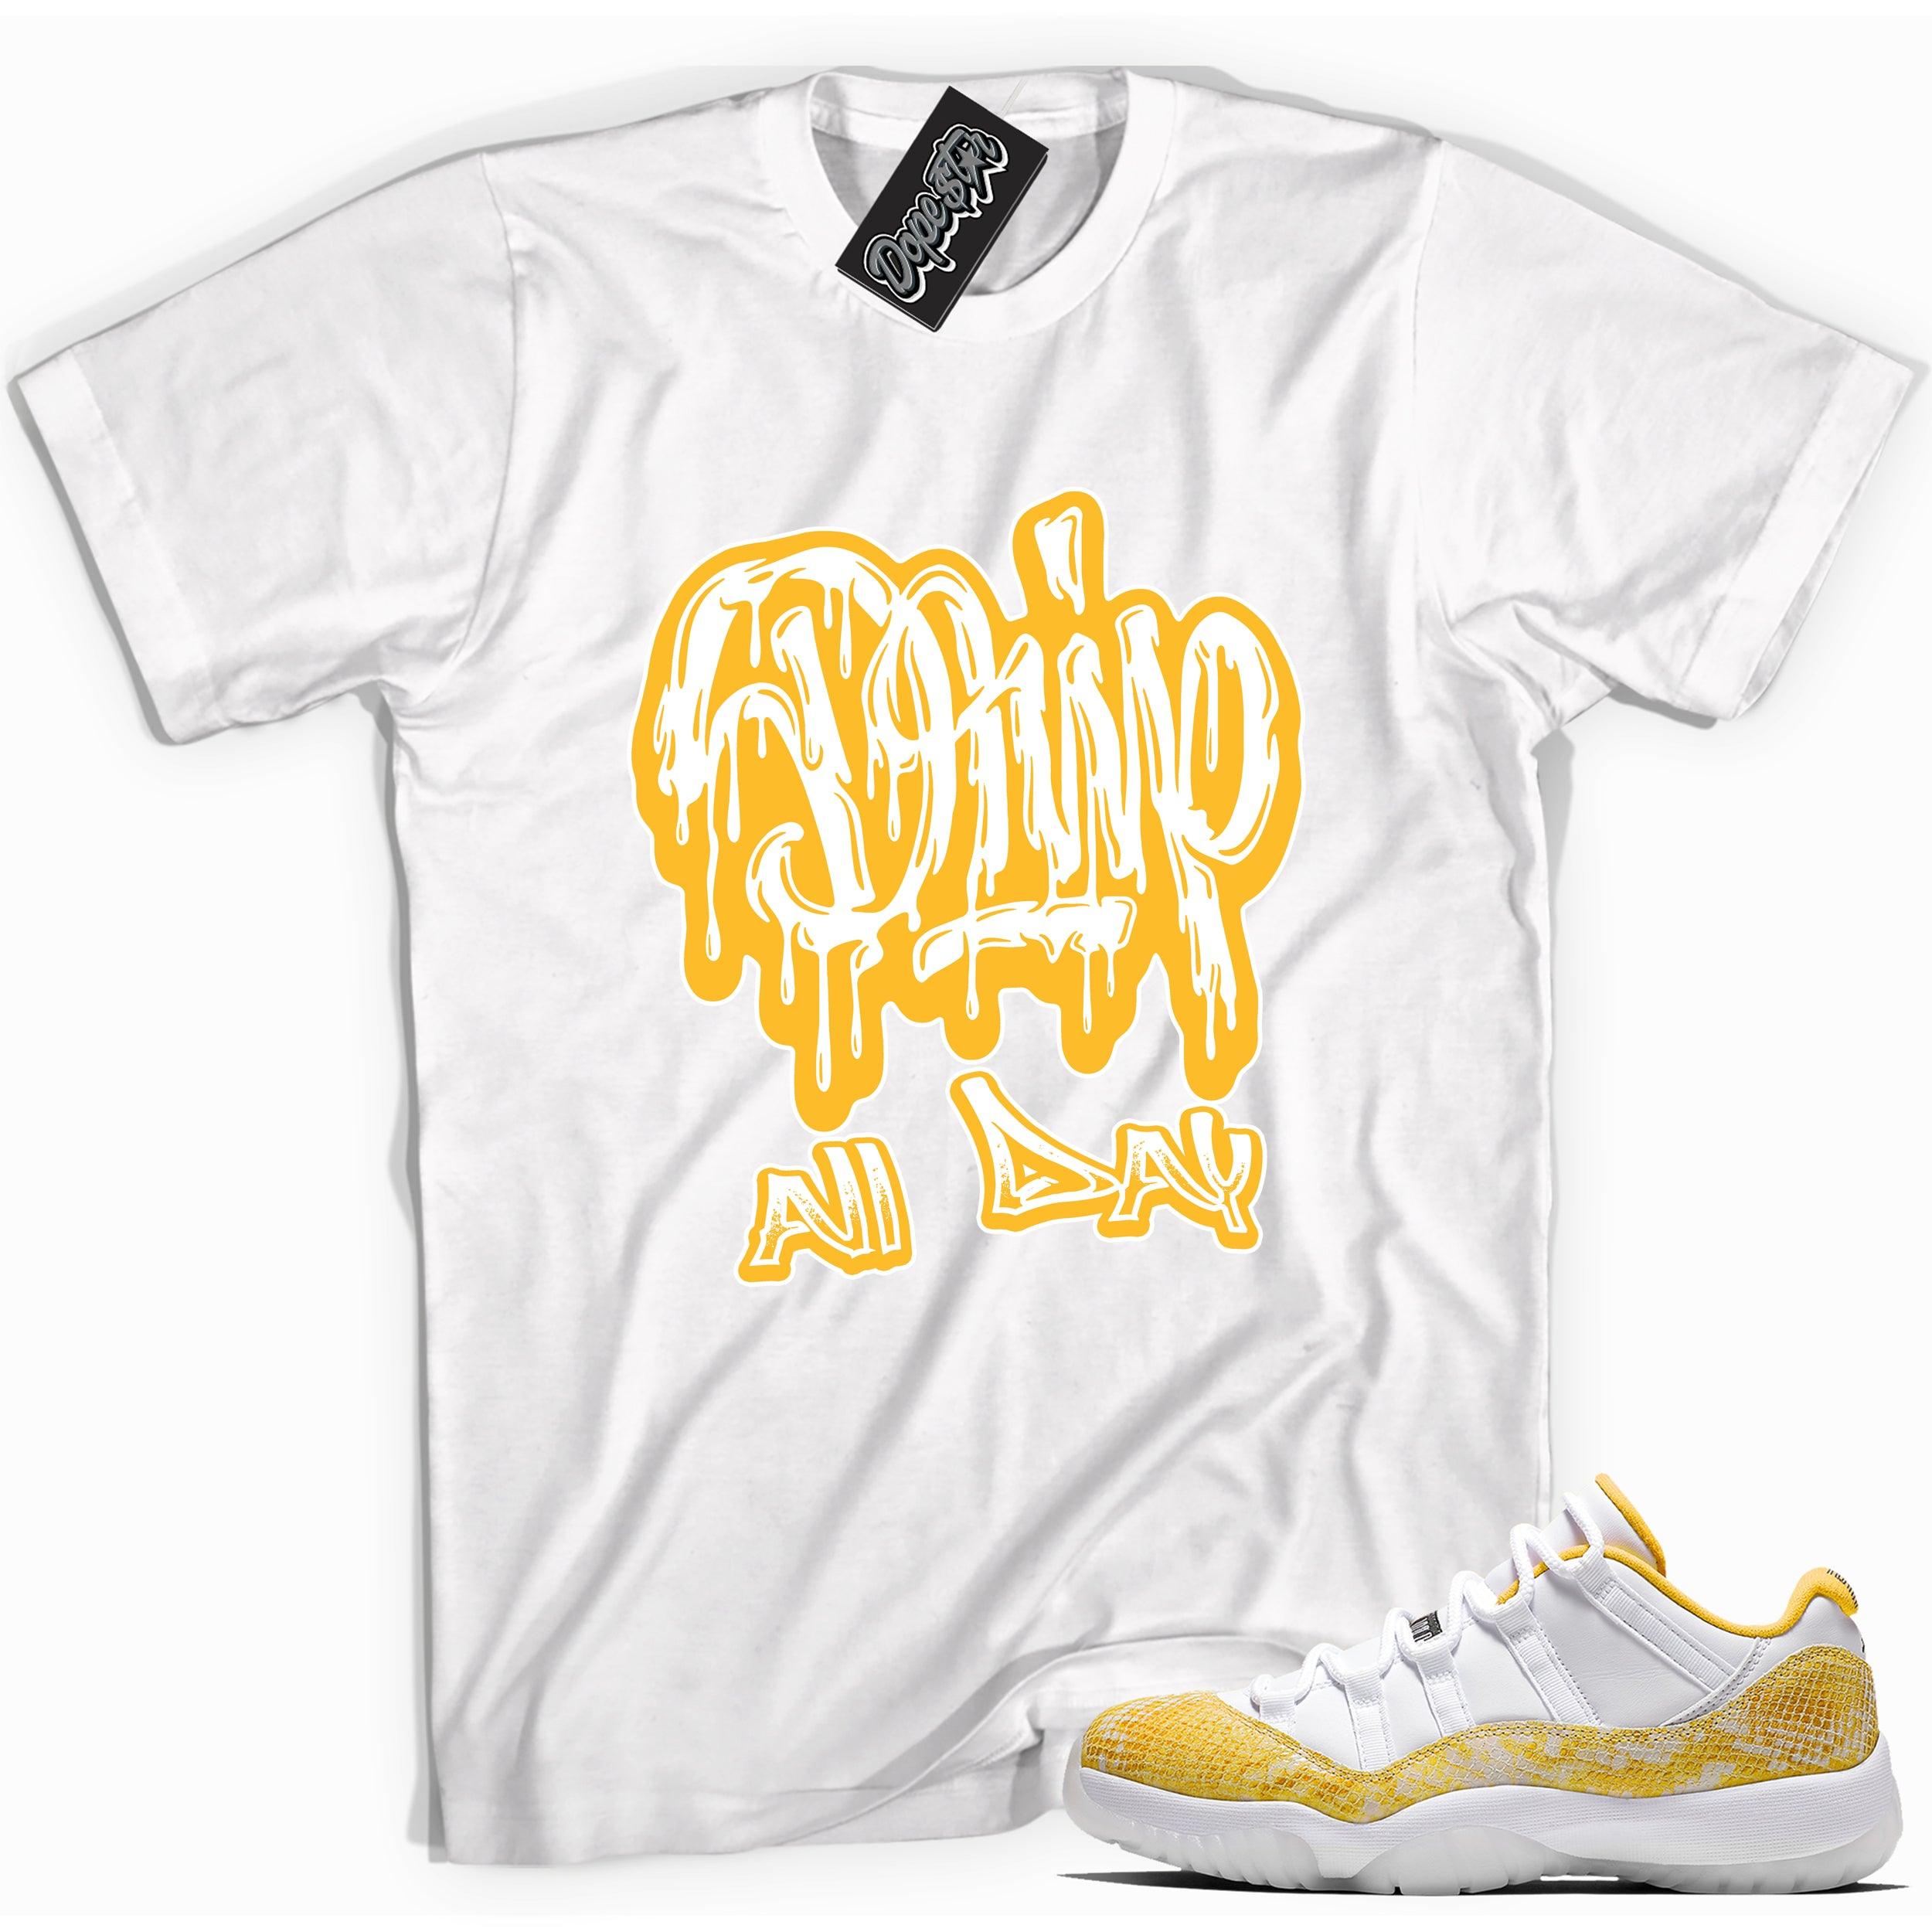 Cool white graphic tee with 'drip all day' print, that perfectly matches Air Jordan 11 Low Yellow Snakeskin sneakers